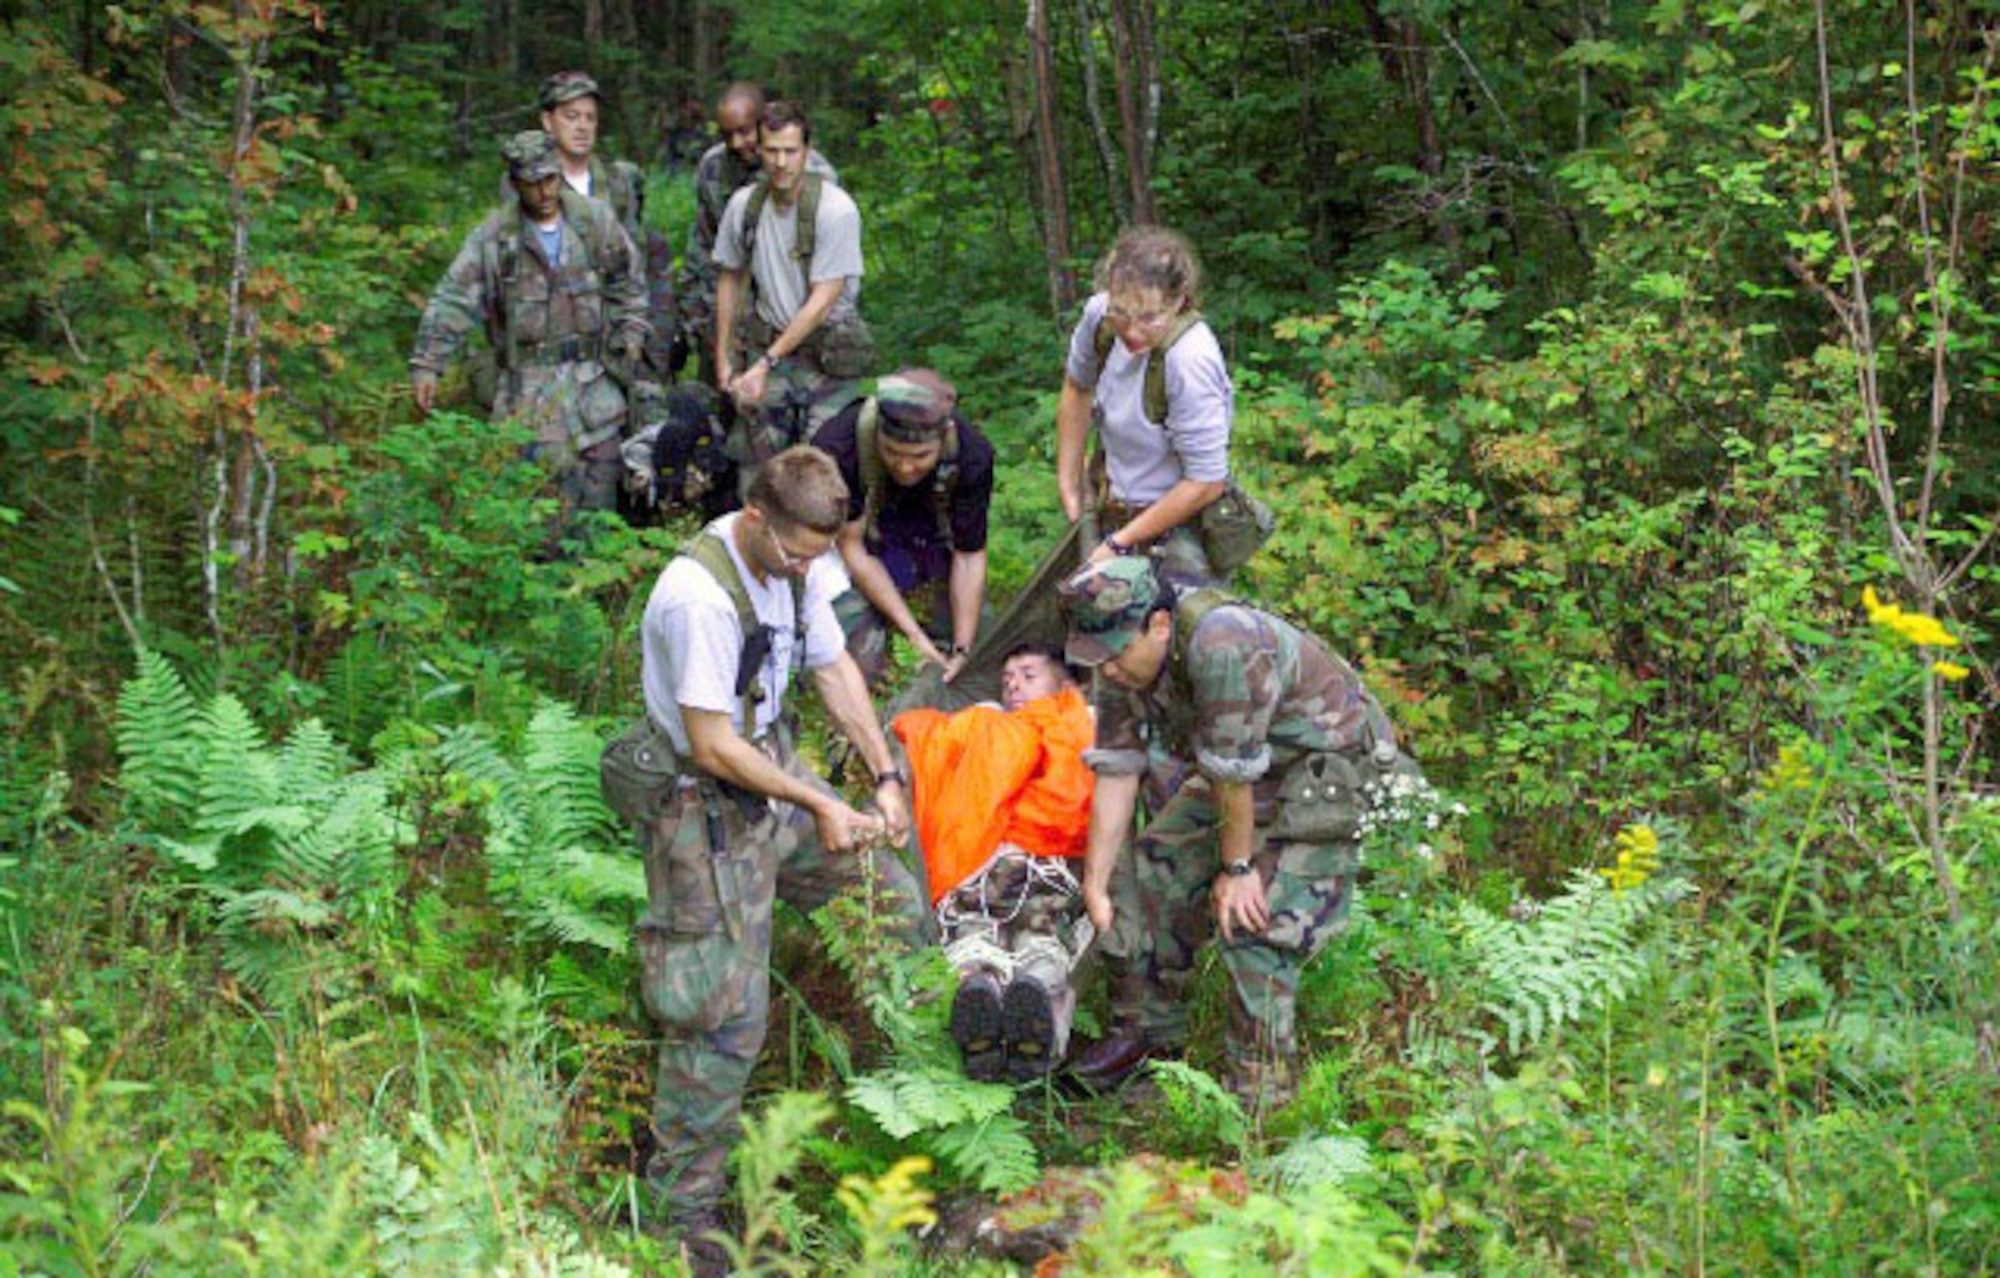 NASA's newest class of astronauts conducts an emergency egress drill during 2004 ASCAN land survival training in the wilderness near Brunswick, Maine. In the foreground, left to right, astronaut candidates James Dutton Jr., Akihiko Hoshide, Dorothy Metcalf-Lindenburger and Satoshi Furukawa use a makeshift gurney to extract fellow astronaut candidate Robert Kimbrough from the woods. In the back, Joseph Acaba, Richard Arnold II, Robert Satcher Jr. and Thomas Marshburn carry Christopher Cassidy. Hoshide and Furukawa represent the Japan Aerospace Exploration Agency. (NASA courtesy image) 